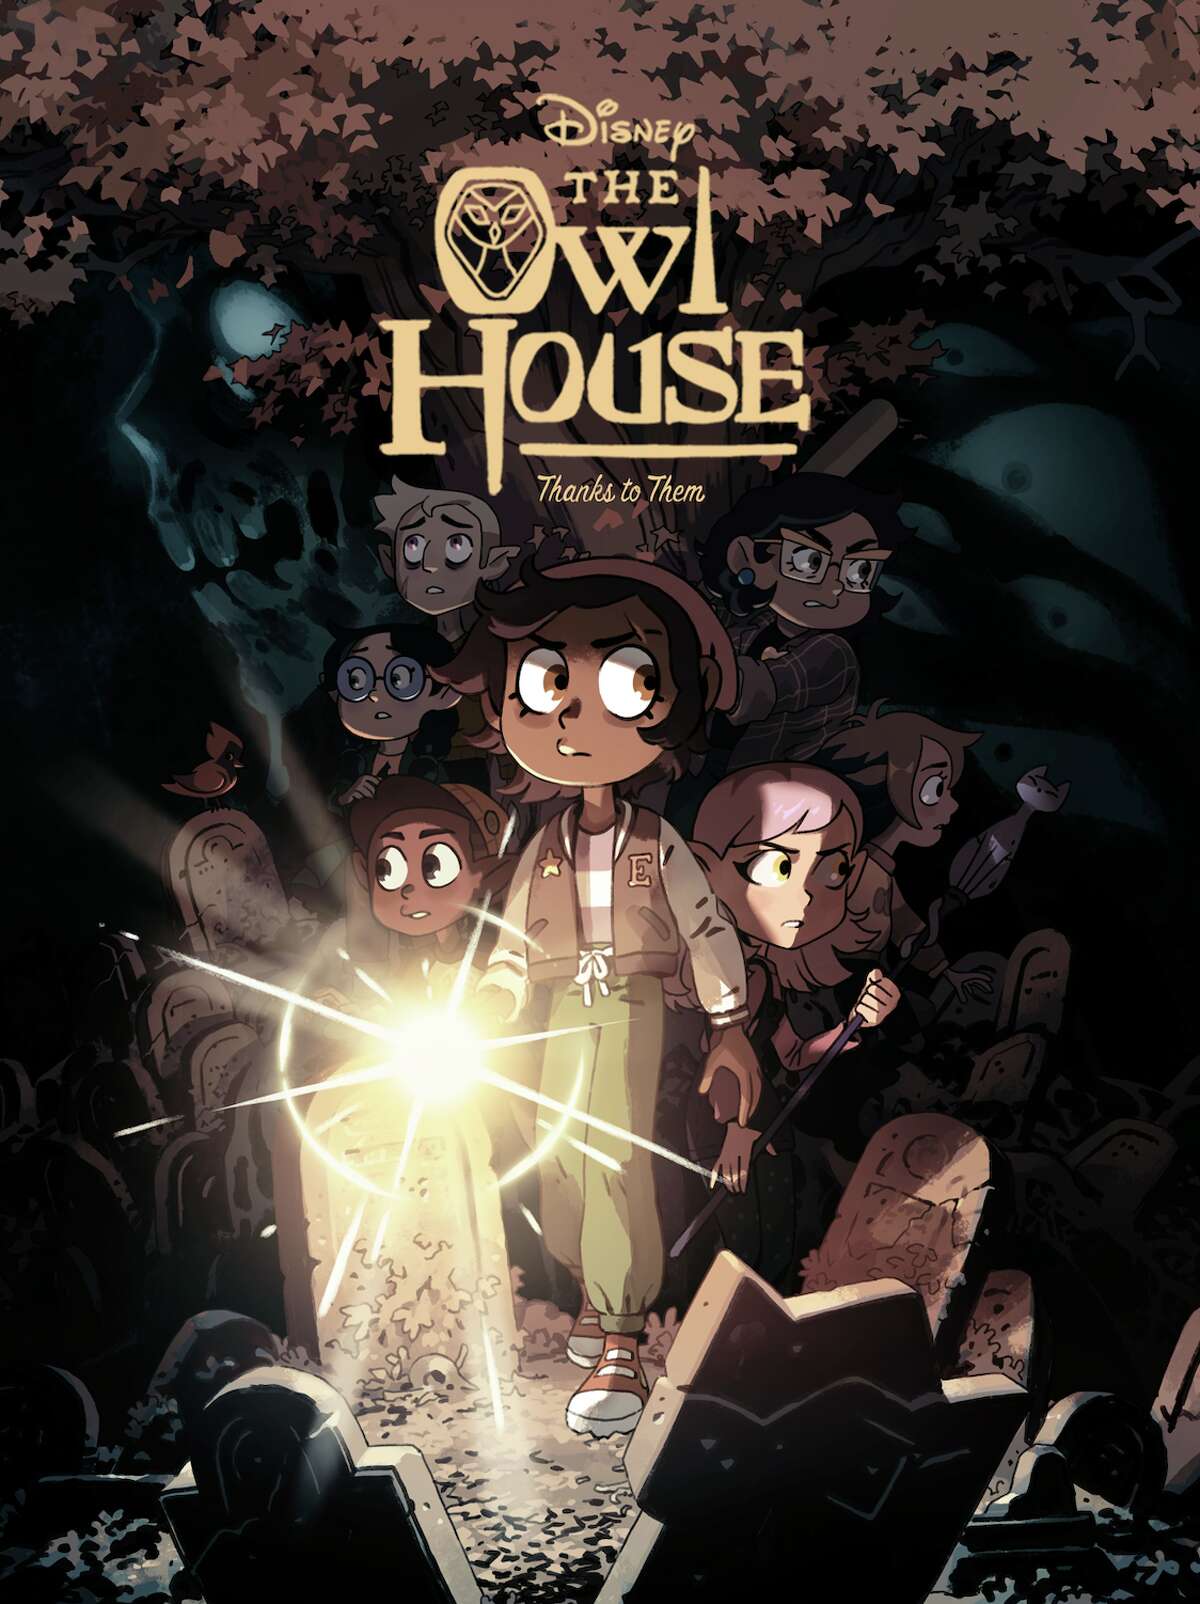 What if Dana pitched The Owl House to Netflix instead of Disney? :  r/TheOwlHouse